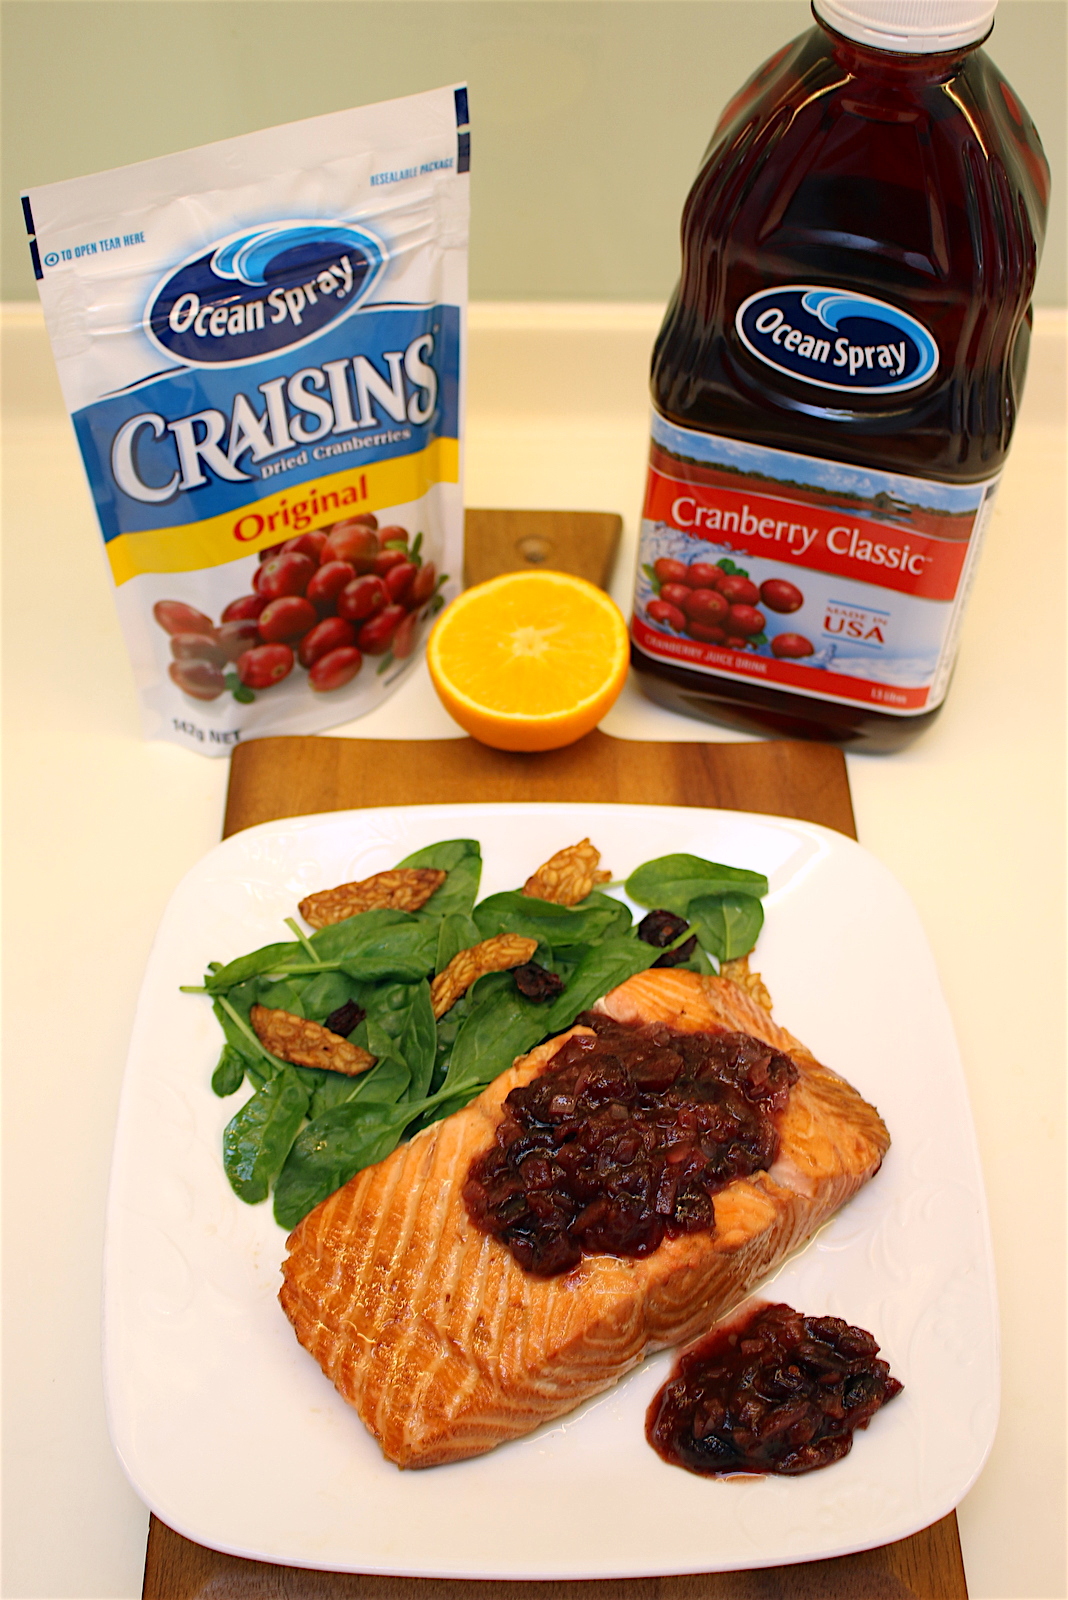 What are some recipes for relish using Ocean Spray cranberries?